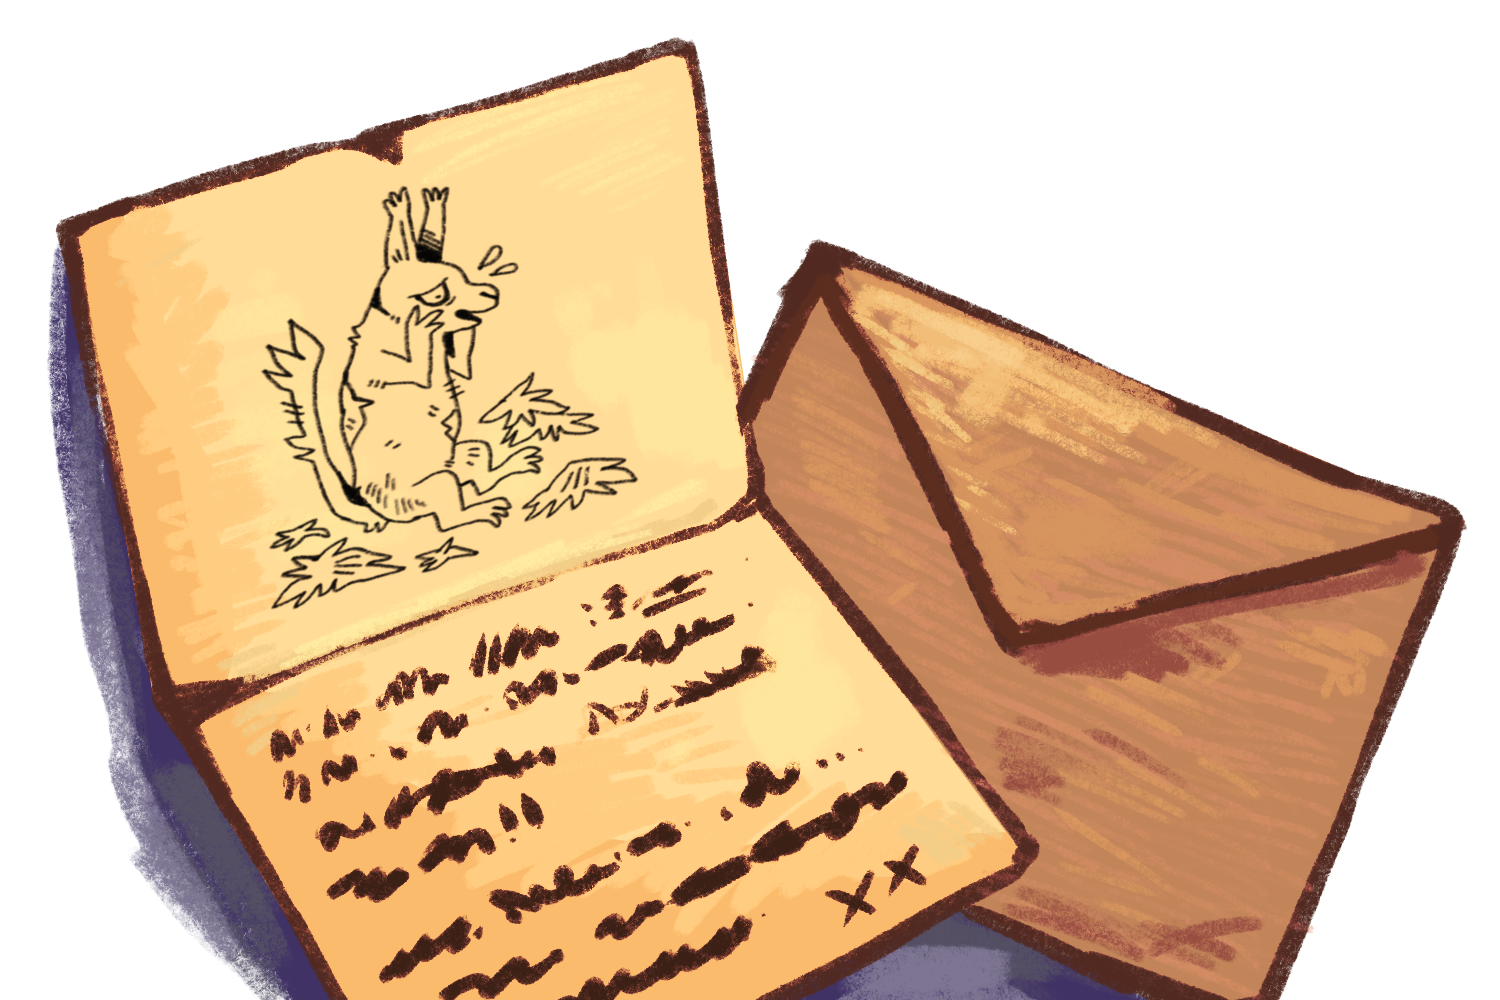 Image. A letter on top of an envelope. The letter has a drawing of an animal with their fur falling off.